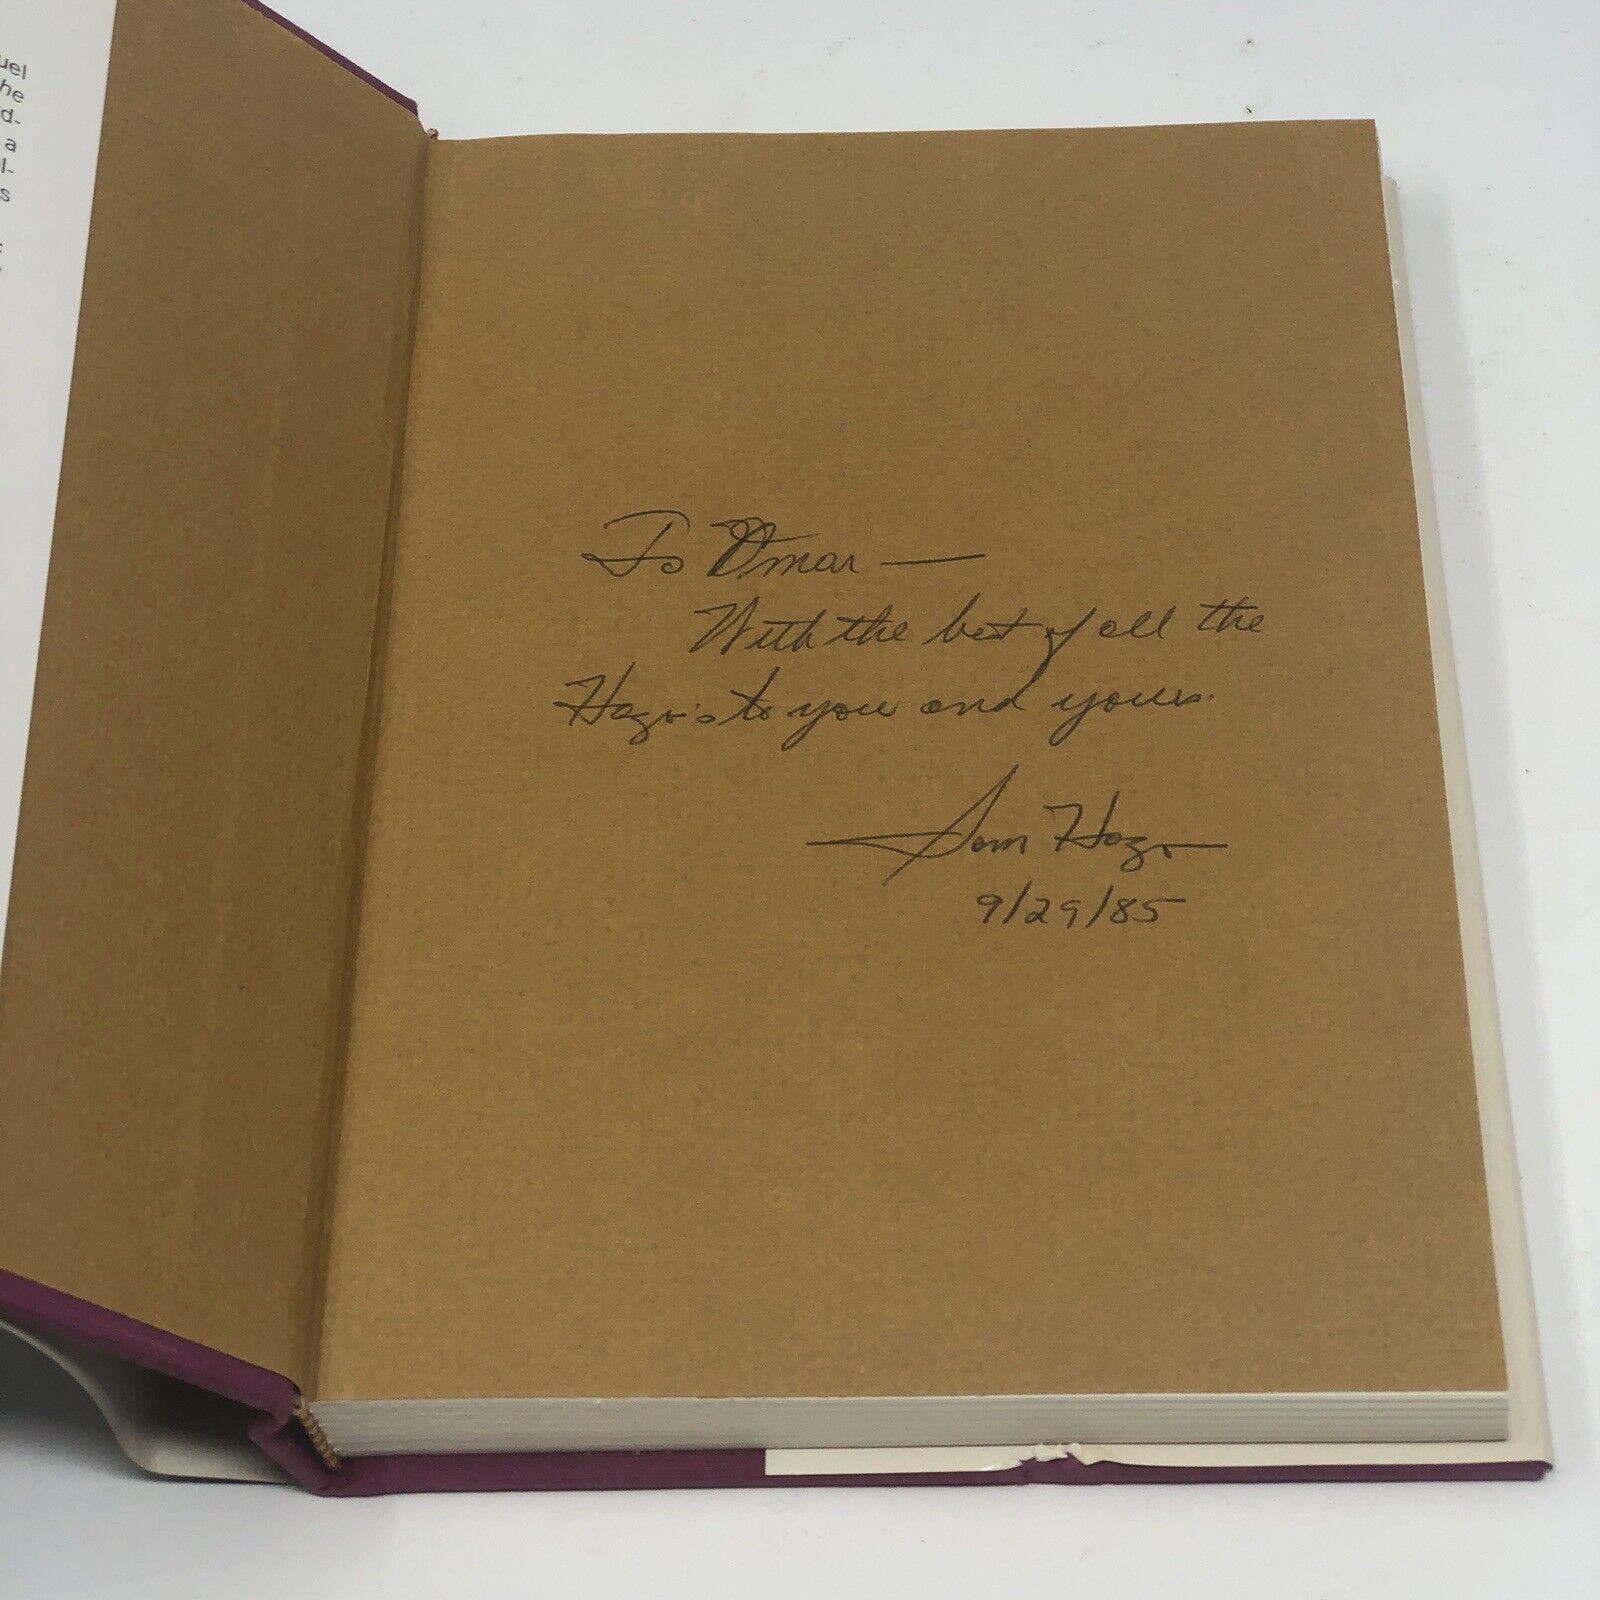 (Signed/Inscription) Once for the Last Bandit New and Previous Poems by Samuel Hazo - Uncle Buddy's Beard & Used Books